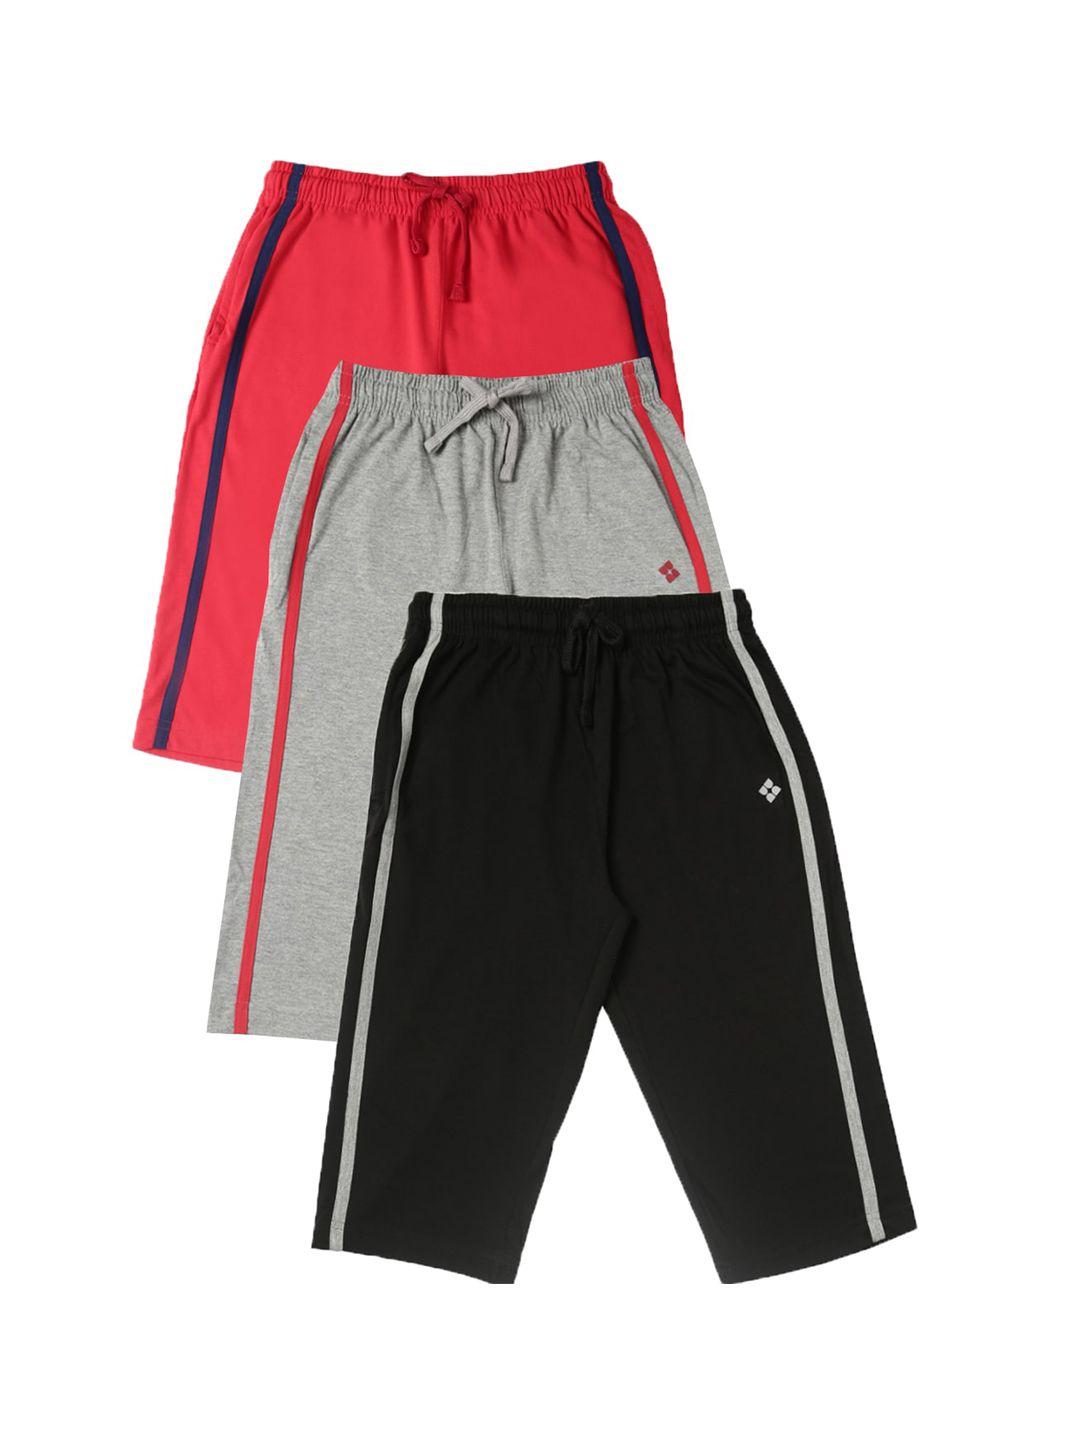 dollar boys red and black pack of 3 solid lounge shorts